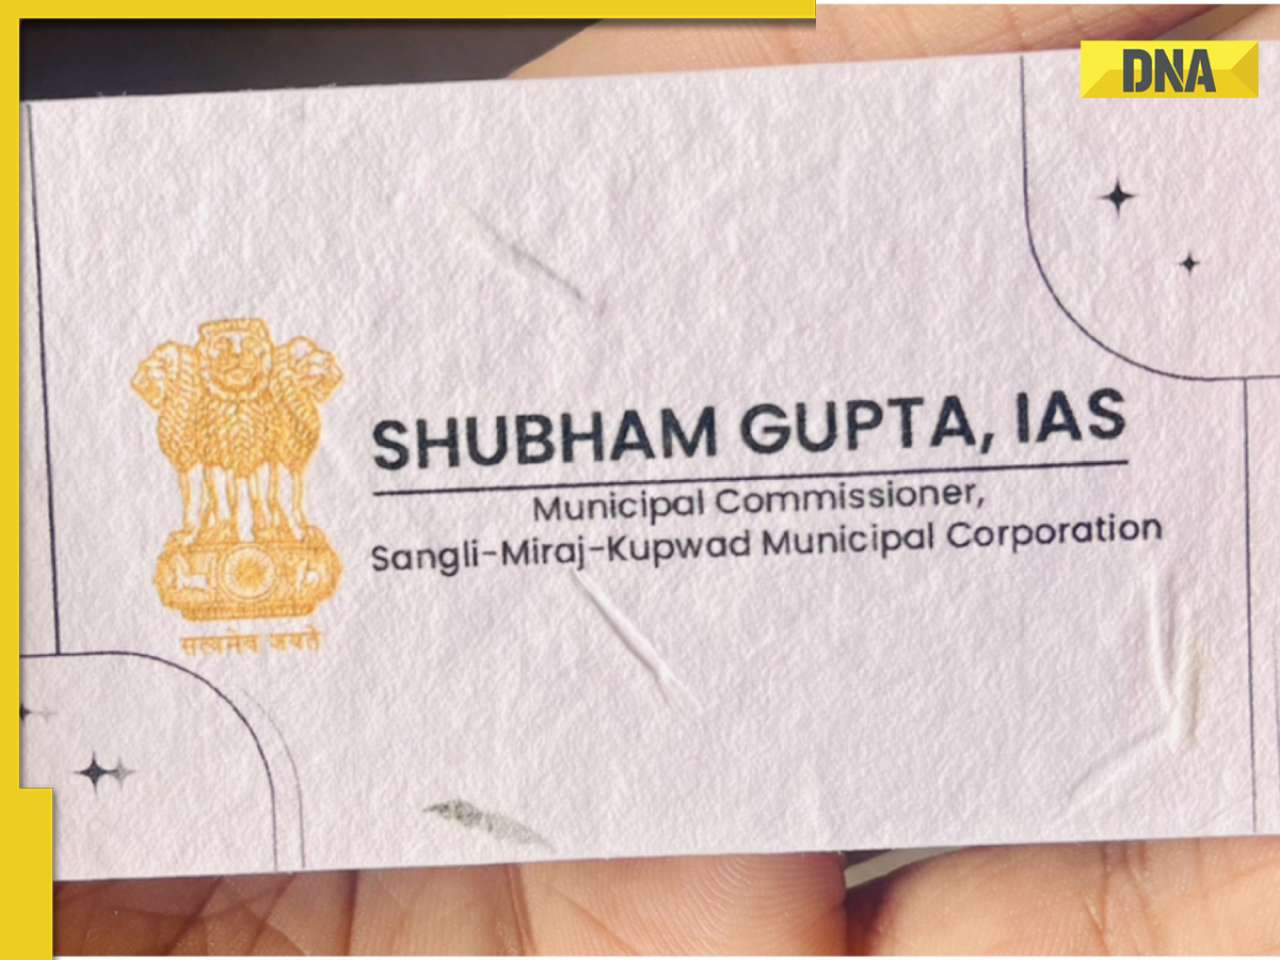 IAS officer's plantable visiting cards go viral: Here's how they work